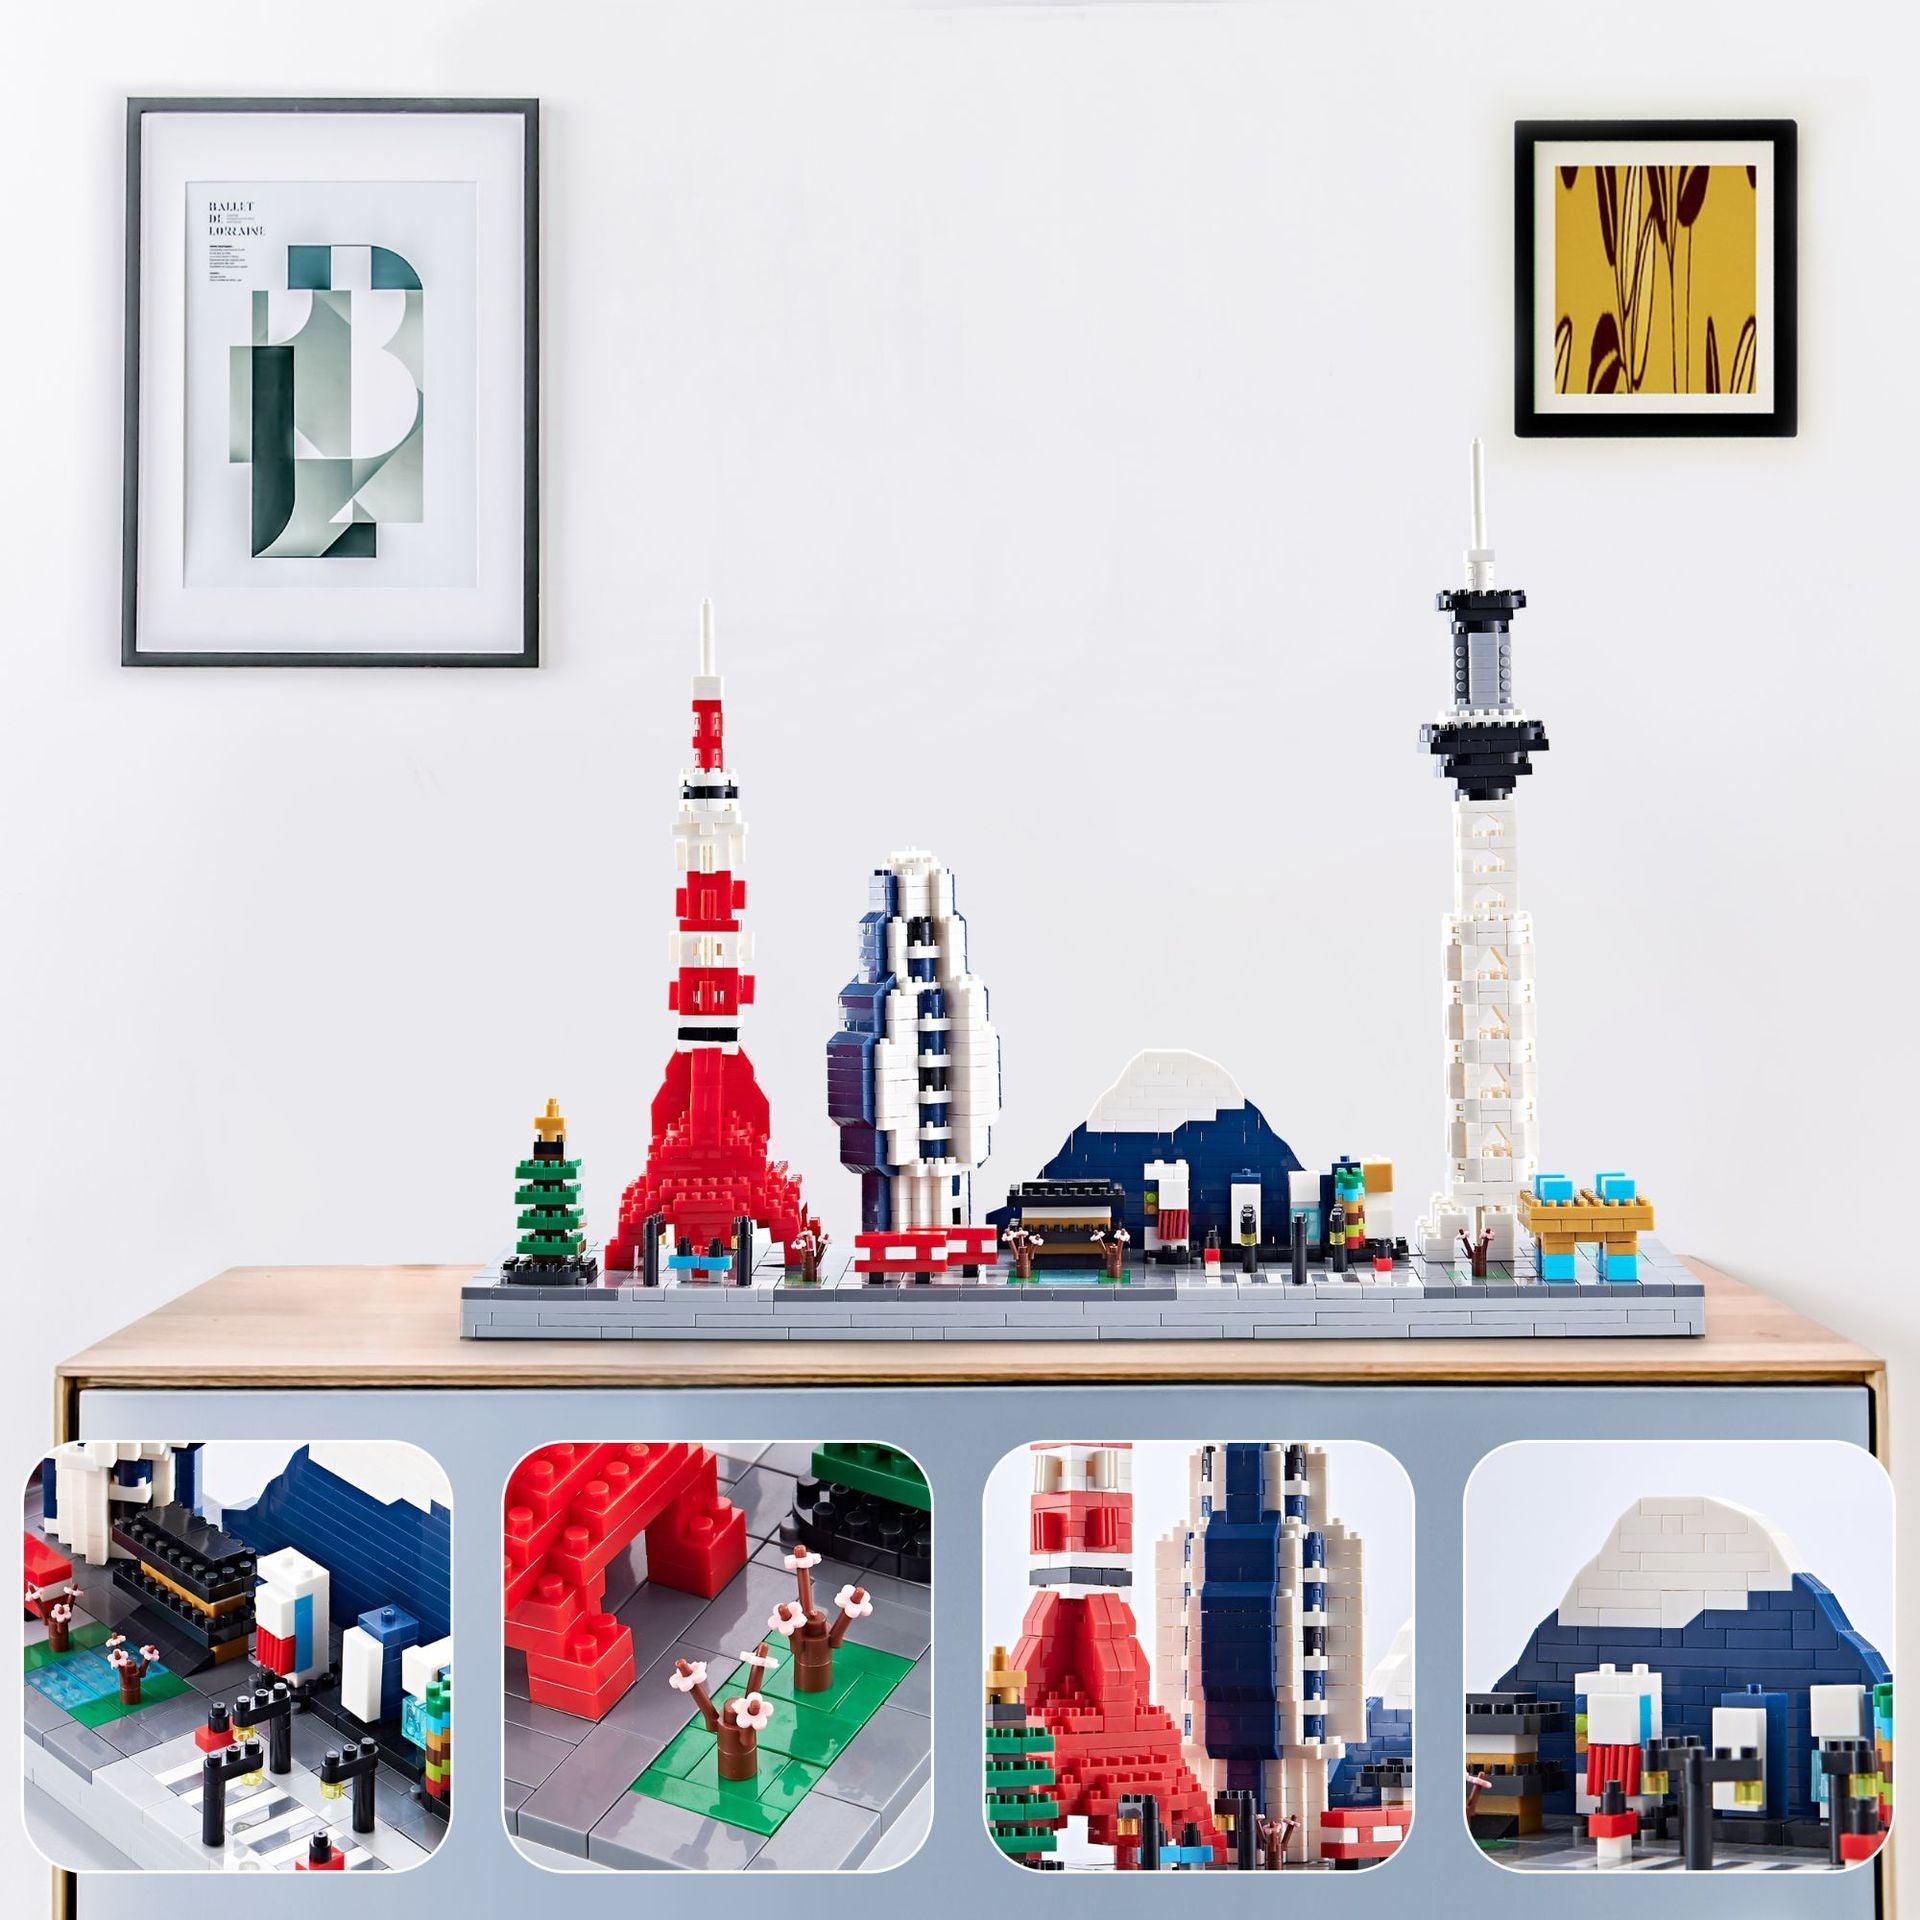 1880 Pcs Tokyo Skyline Building Blocks Toy Collector's Edition - Enhance Focus, Divert Attention, and Relieve Anxiety - PANSEKtoy